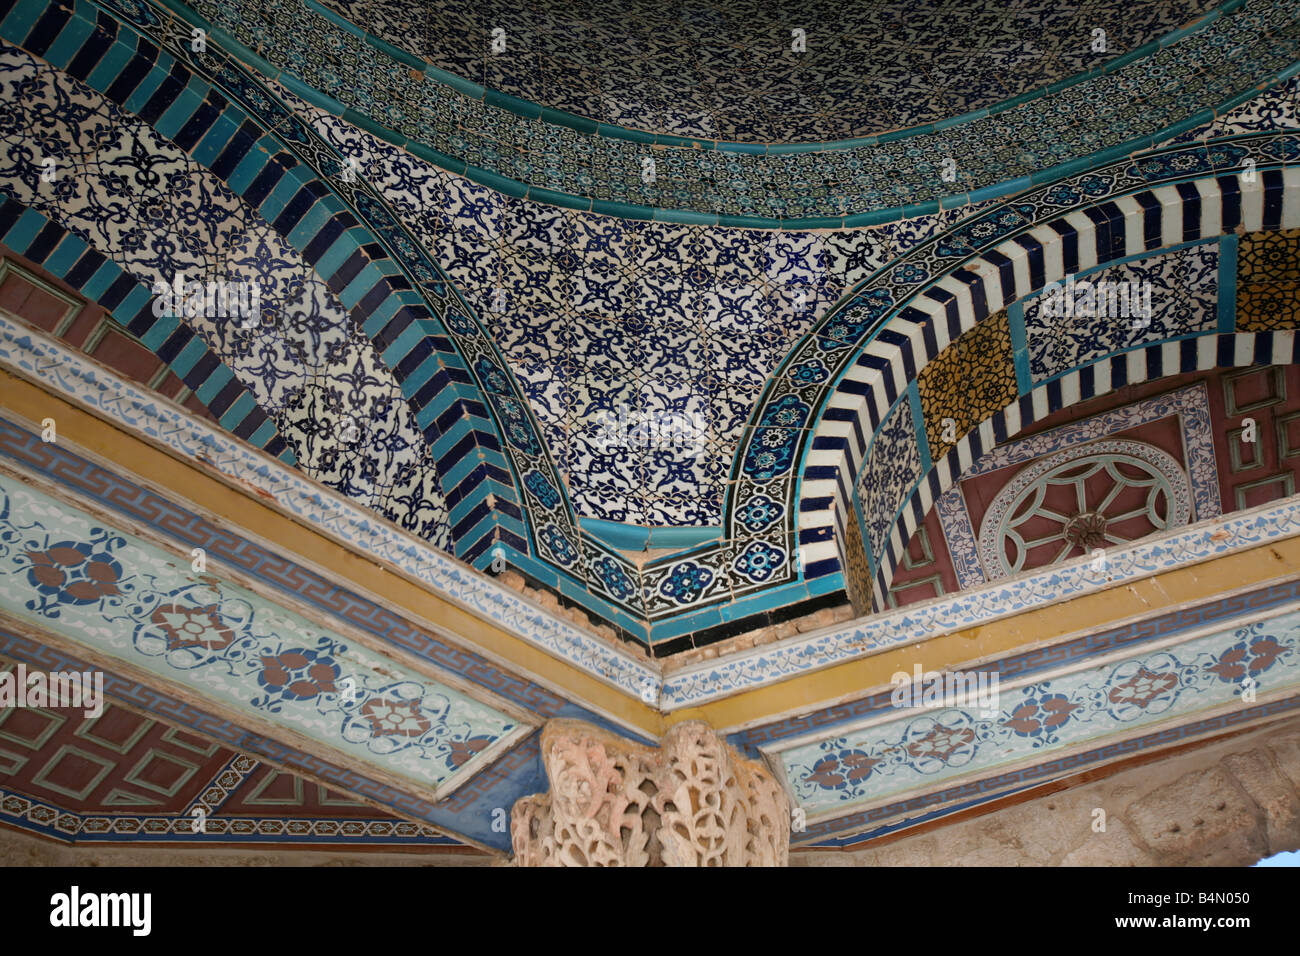 The Mosaic Interior Cupola Of The Dome Of The Rock On Temple